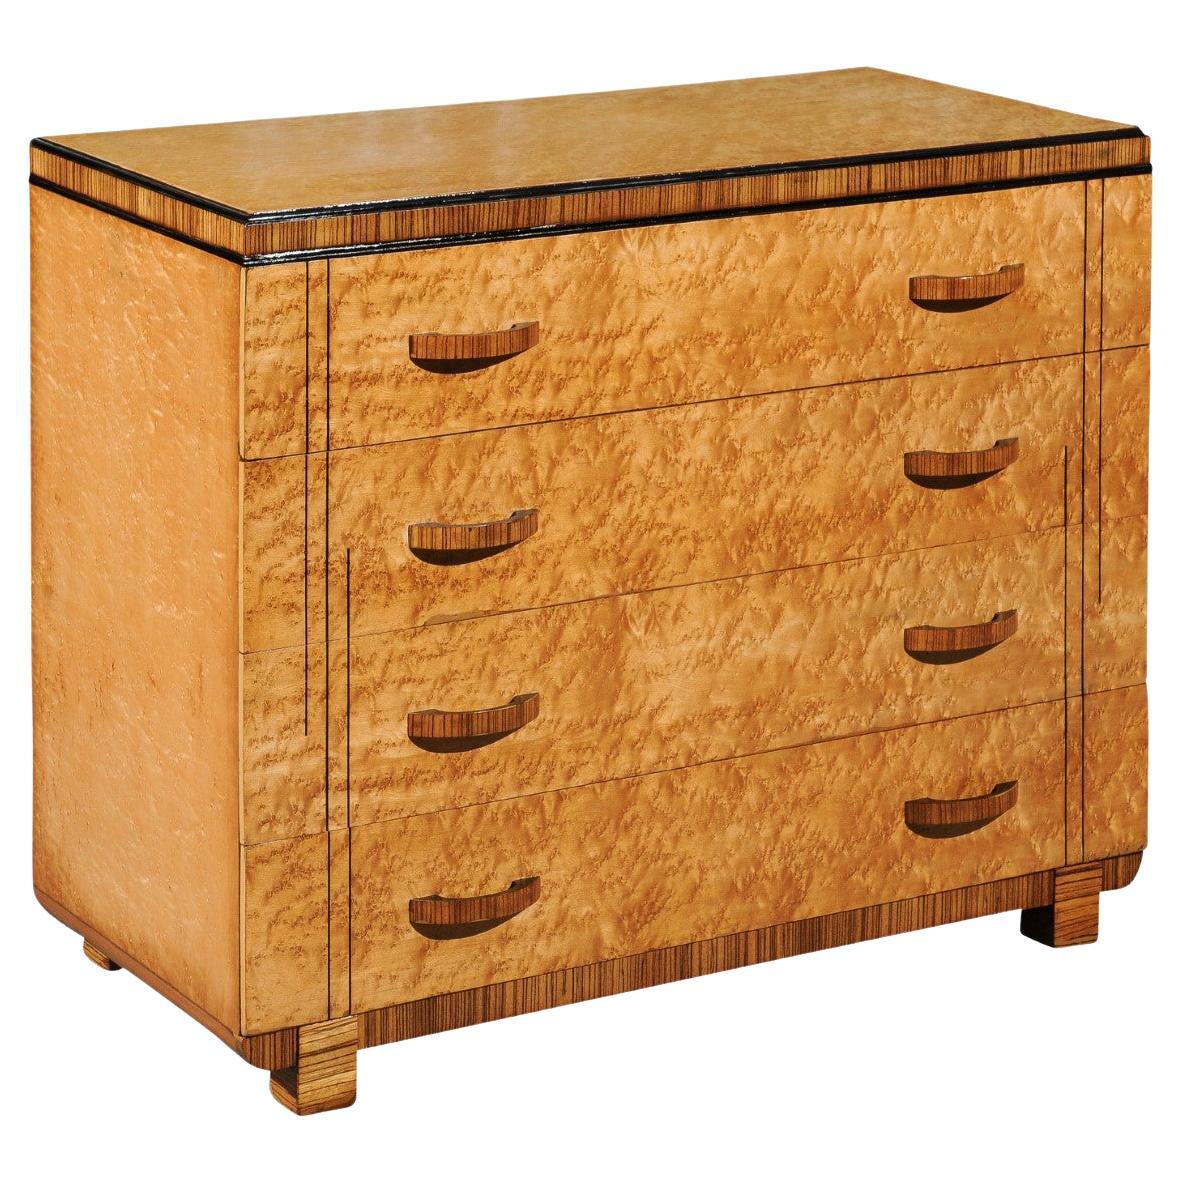 Breathtaking Art Deco Commode in Birdseye Maple and Madagascar Rosewood, 1925